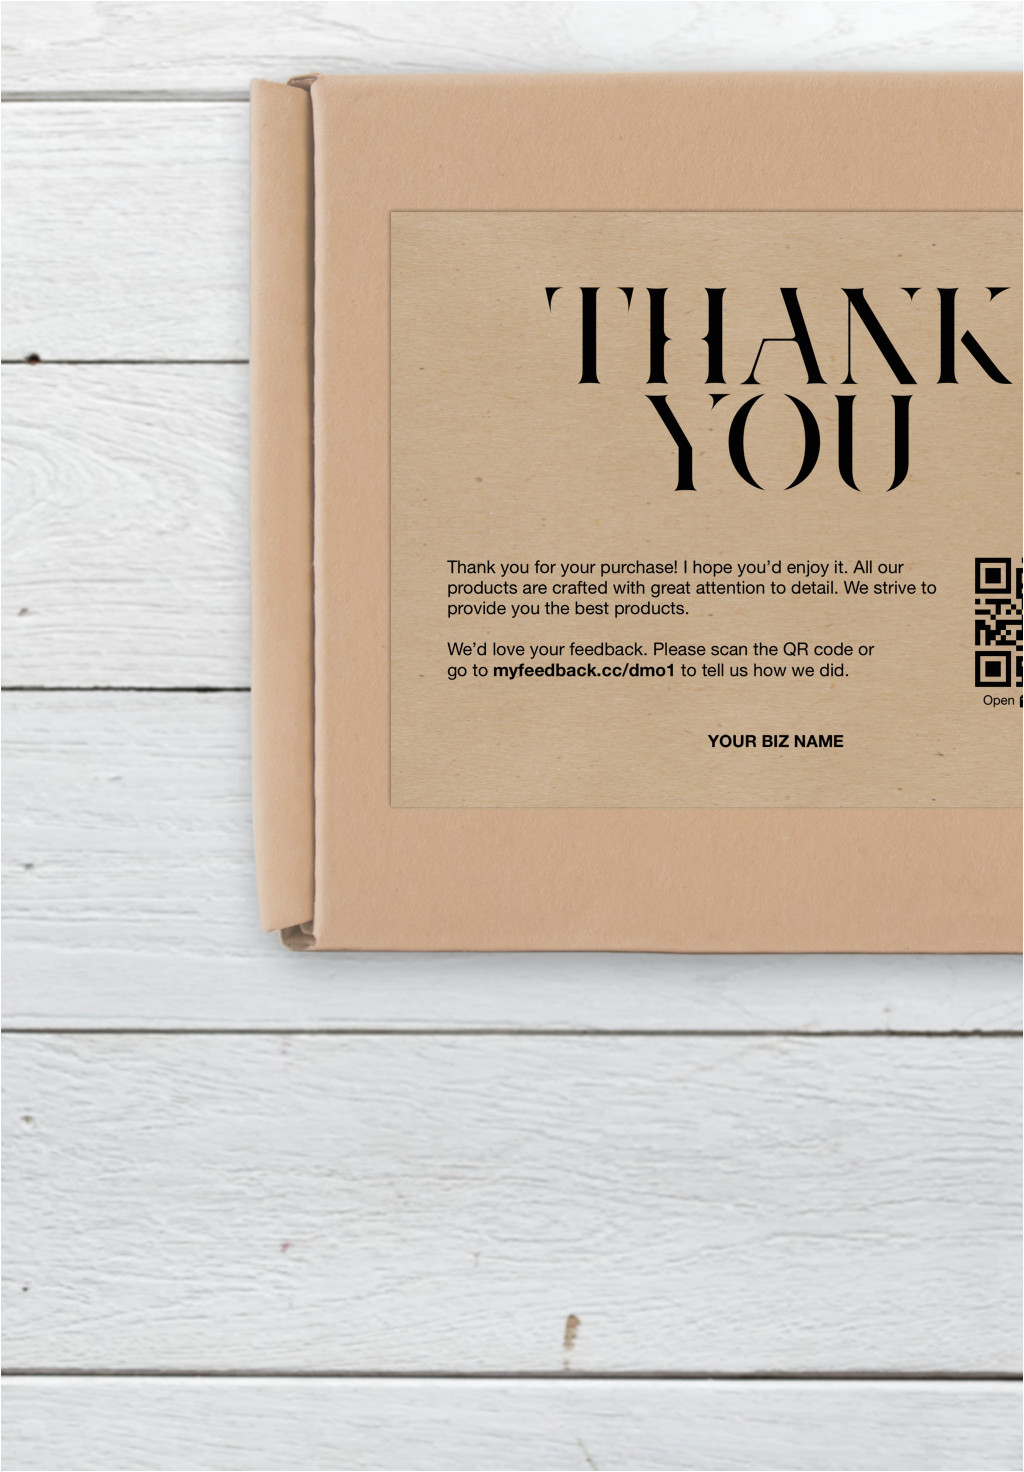 Picture Of Thank You Card Business Thank You Card Thank You for Your Purchase